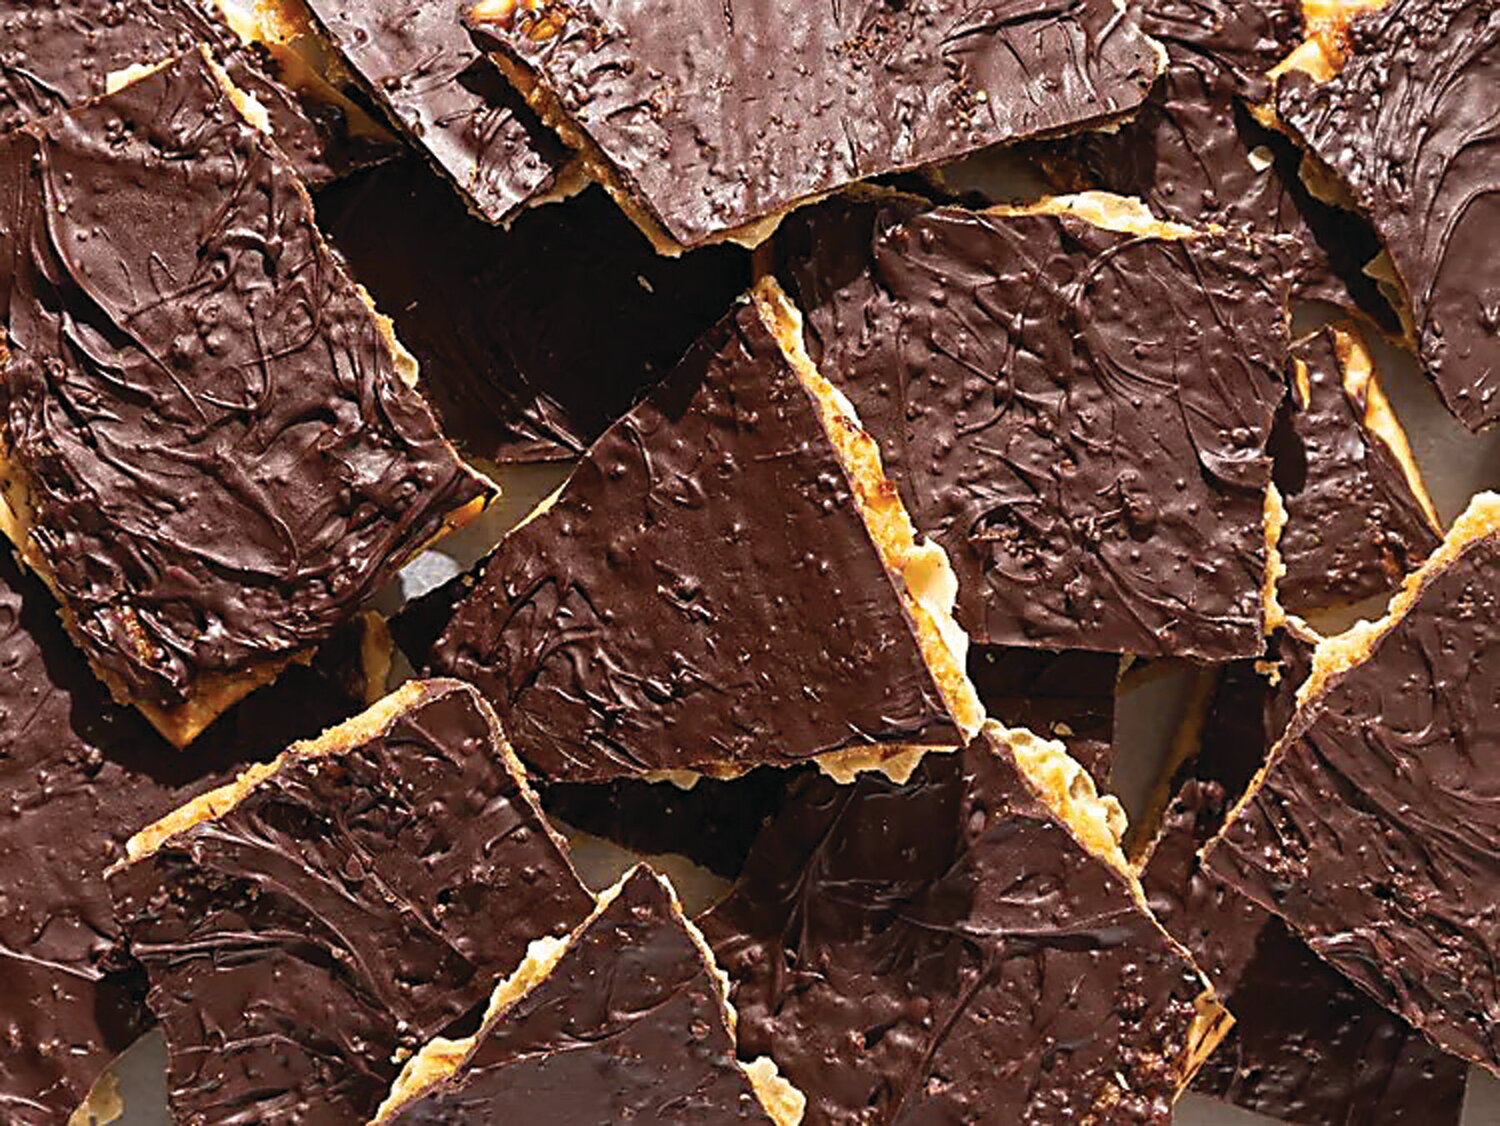 Matzo can be covered in chocolate for dessert. Feel free to add favorite toppings.